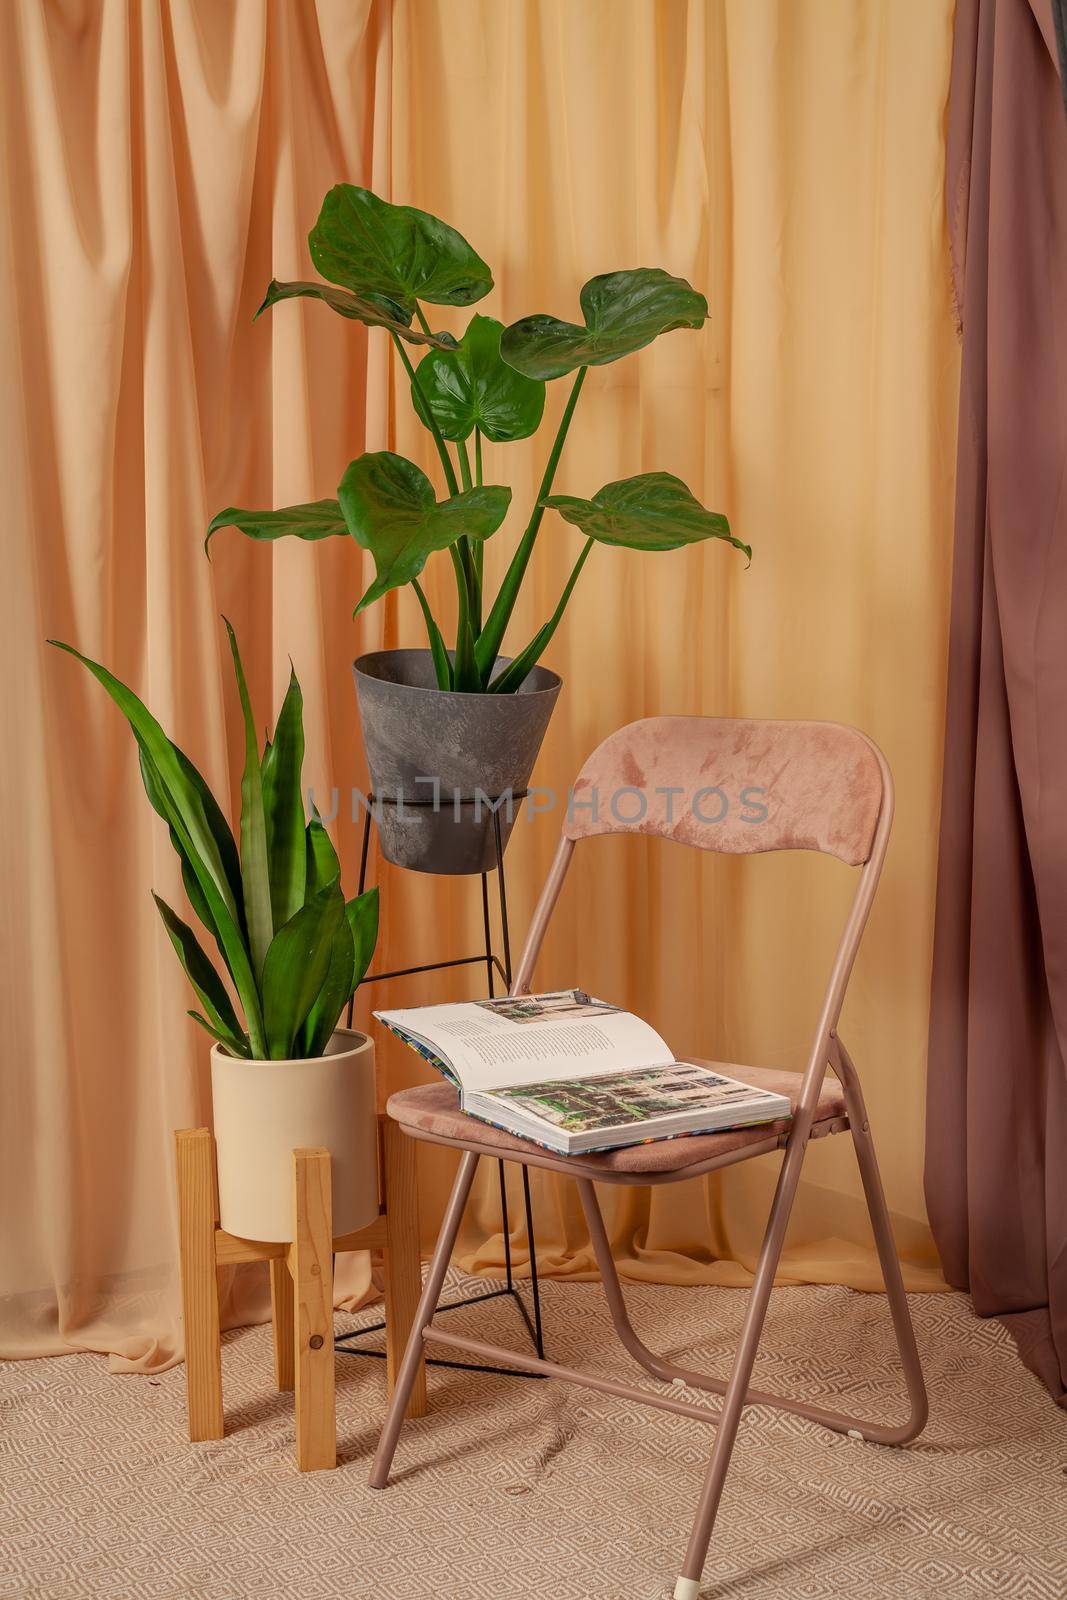 Still life with plants on a brown curtains background with book on the chair. by igor_stramyk